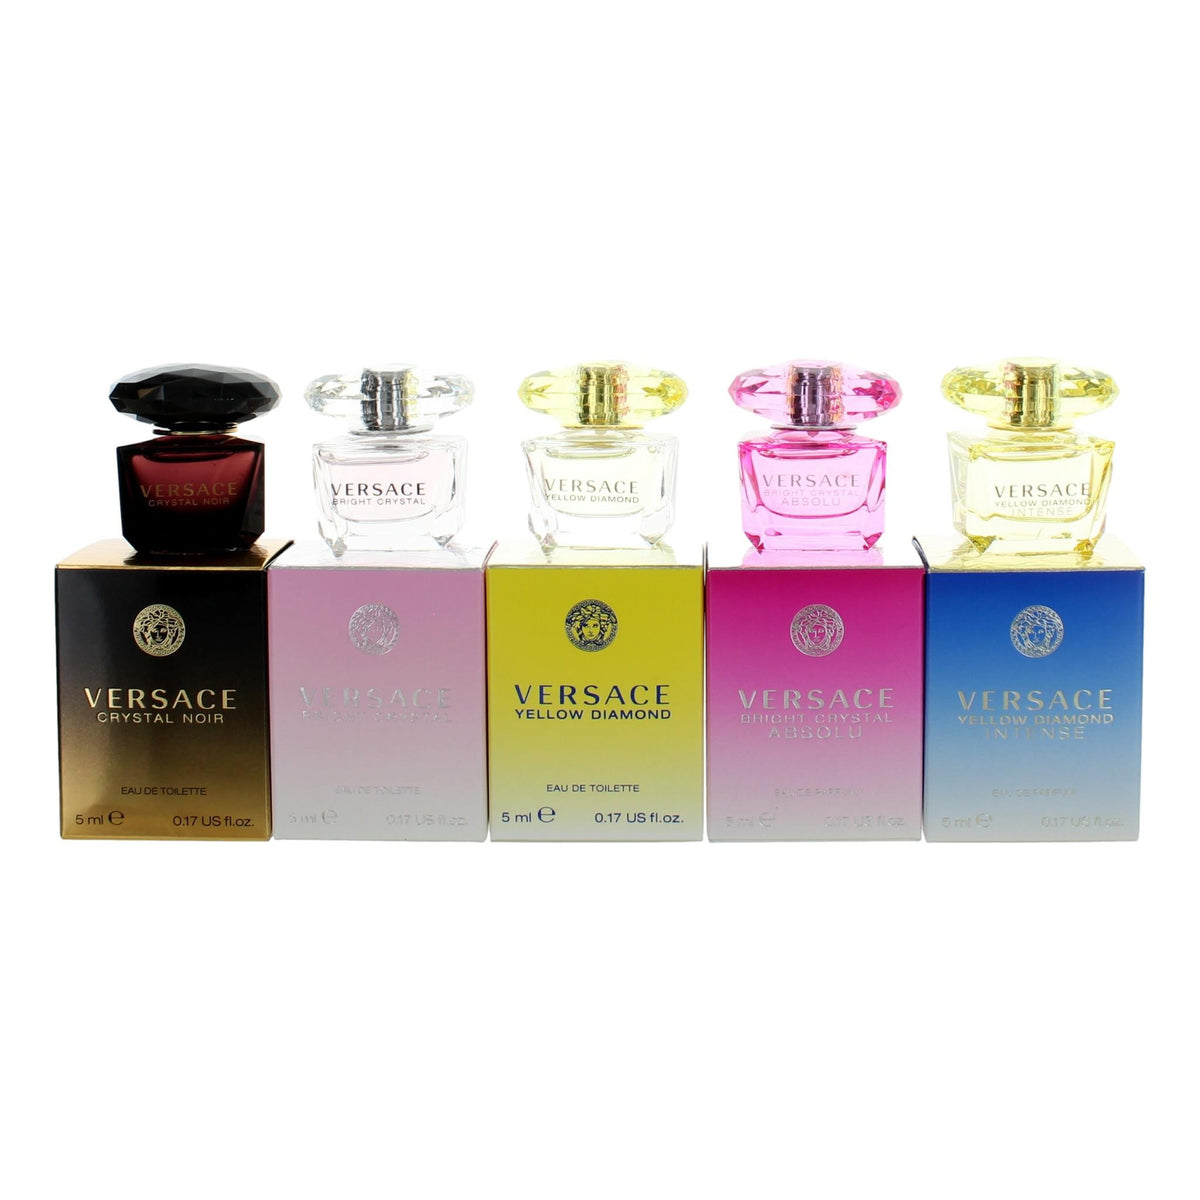 Versace by Versace, 5 Piece Mini Variety Set for Women